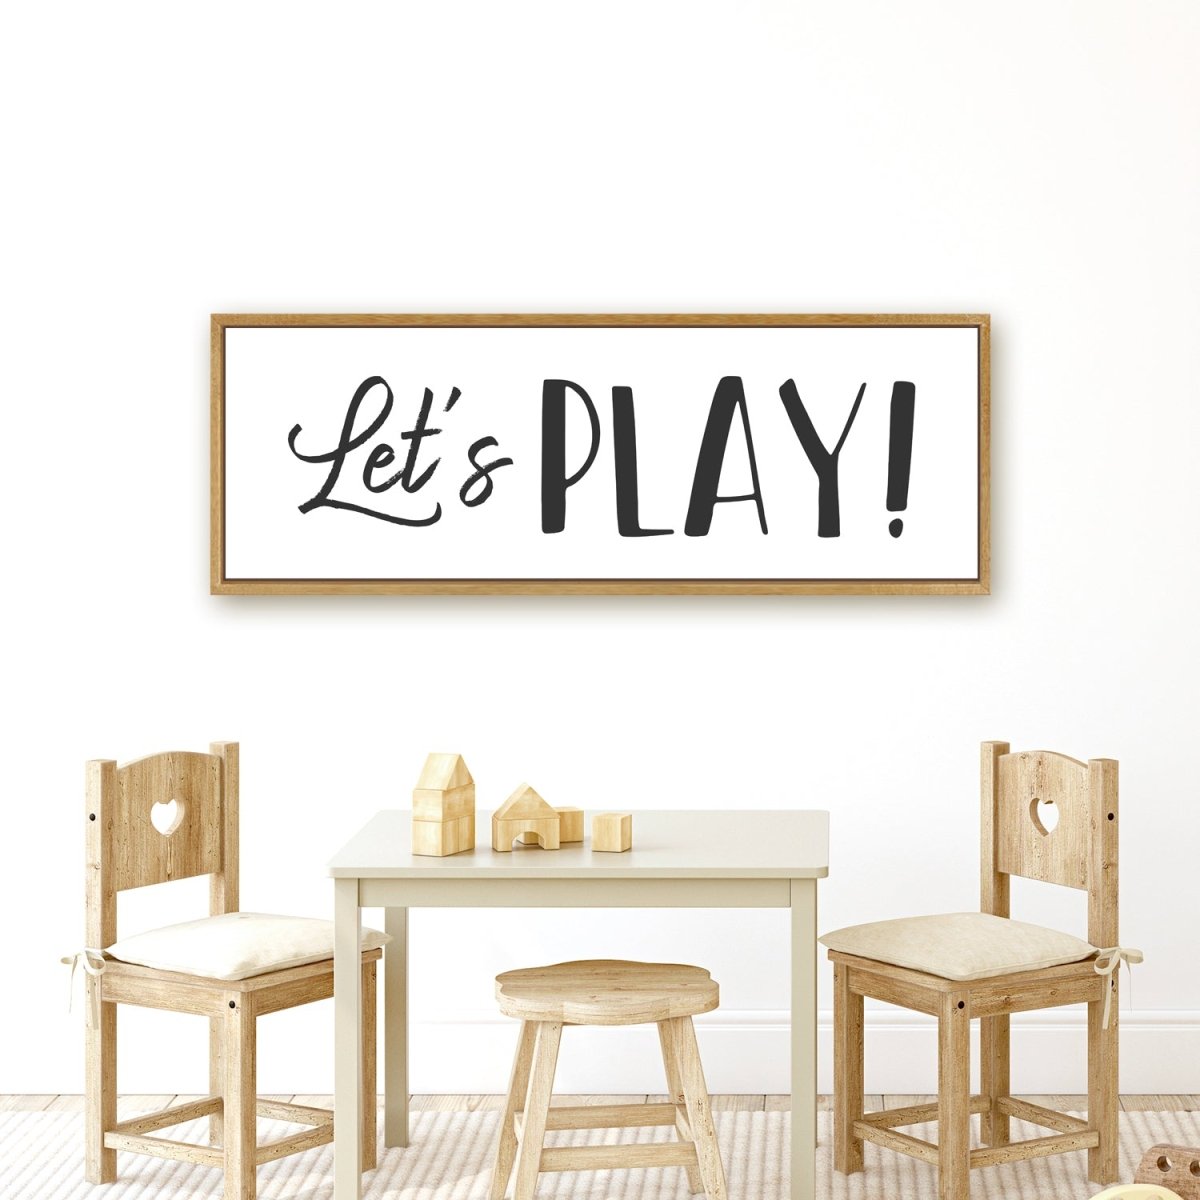 Let's Play Kid's Bedroom Sign Hanging Above Play Table - Pretty Perfect Studio